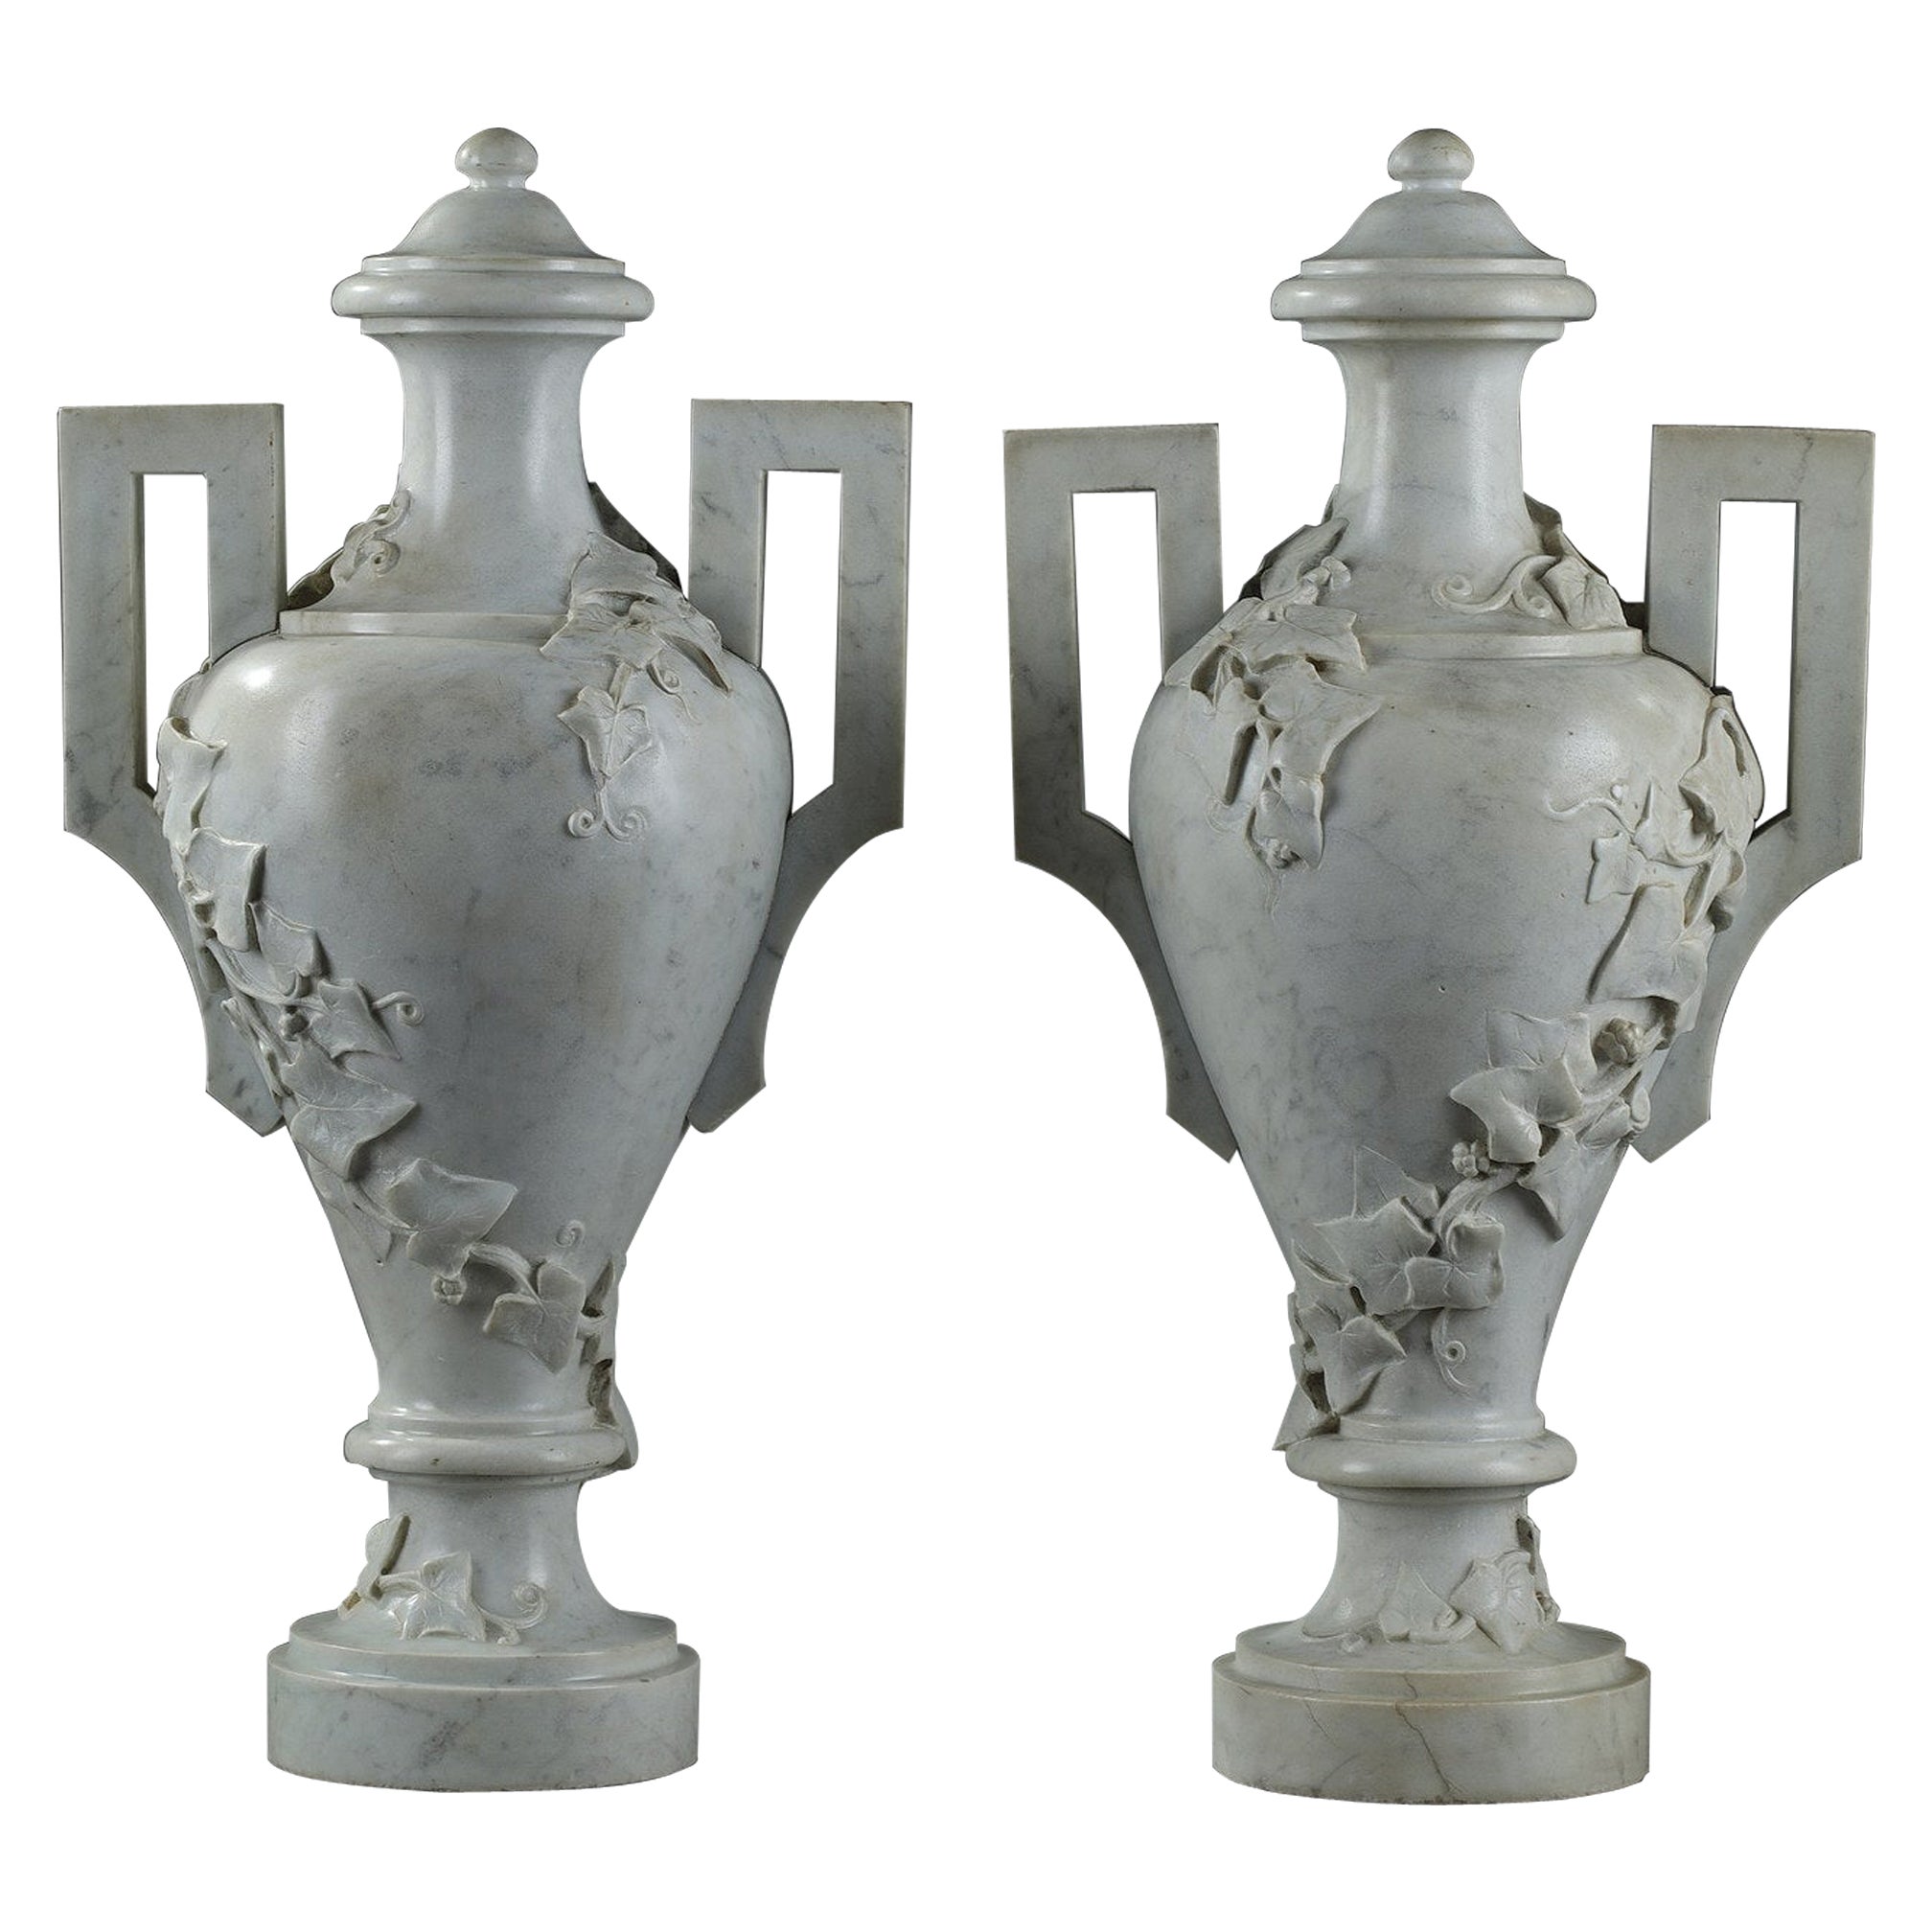 Pair of White Marble Vases with Ivy Decoration, 19th Century